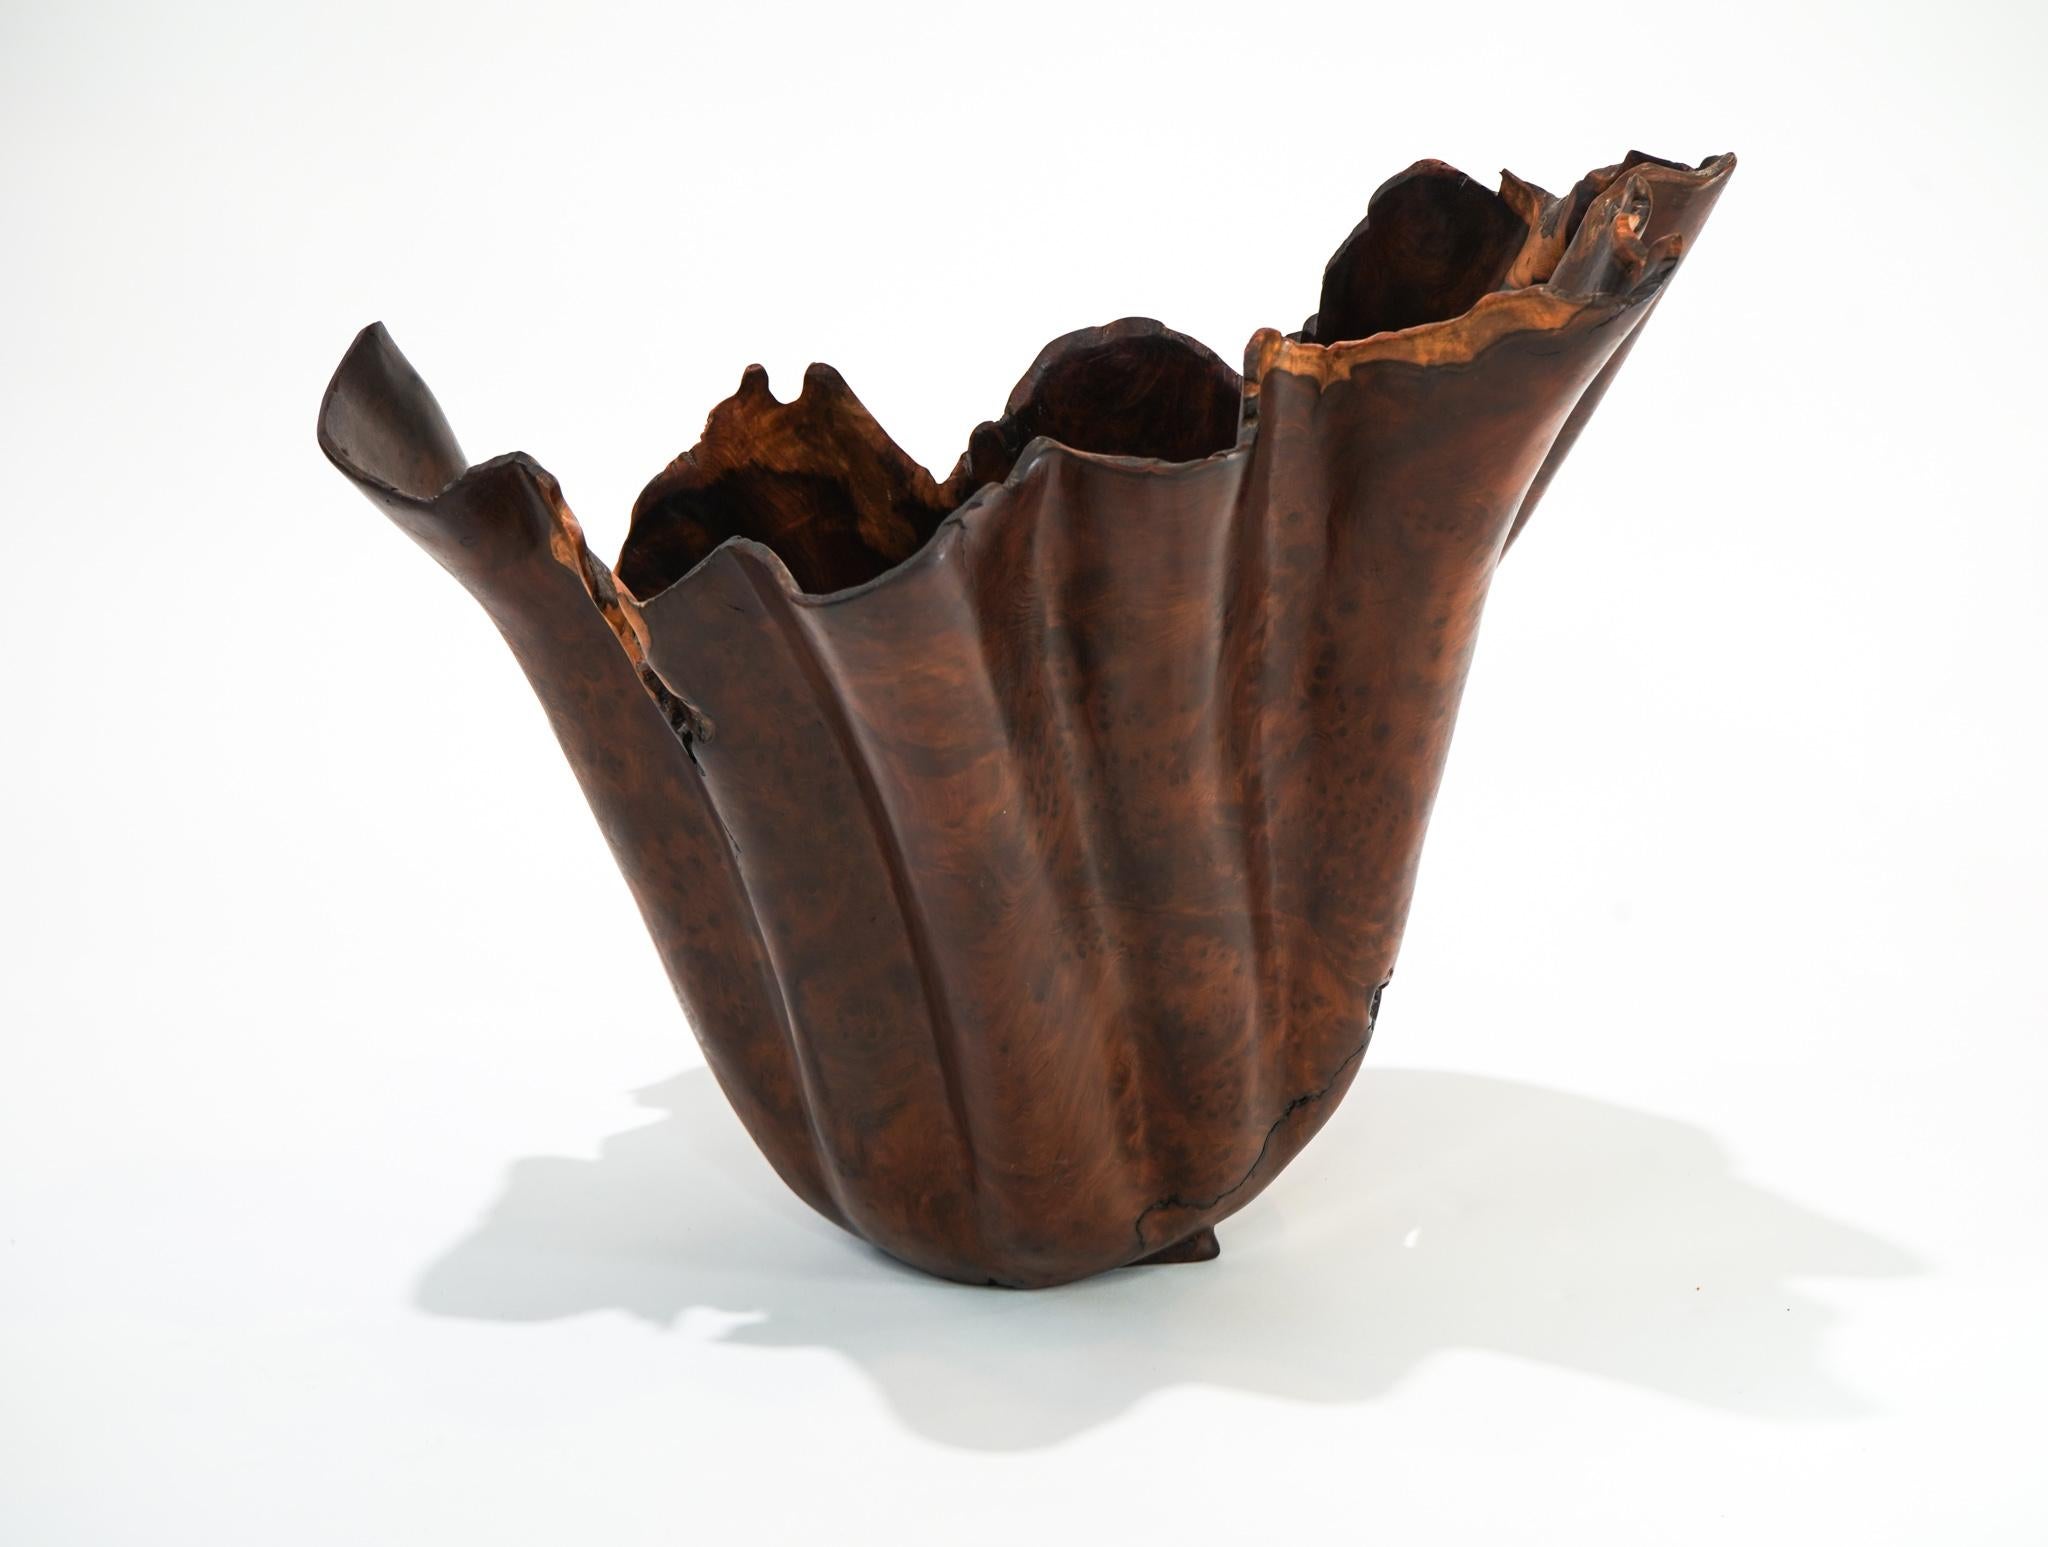 American Brad Sells Organic Modern Redwood Abstract Vessel Sculpture 1997 For Sale